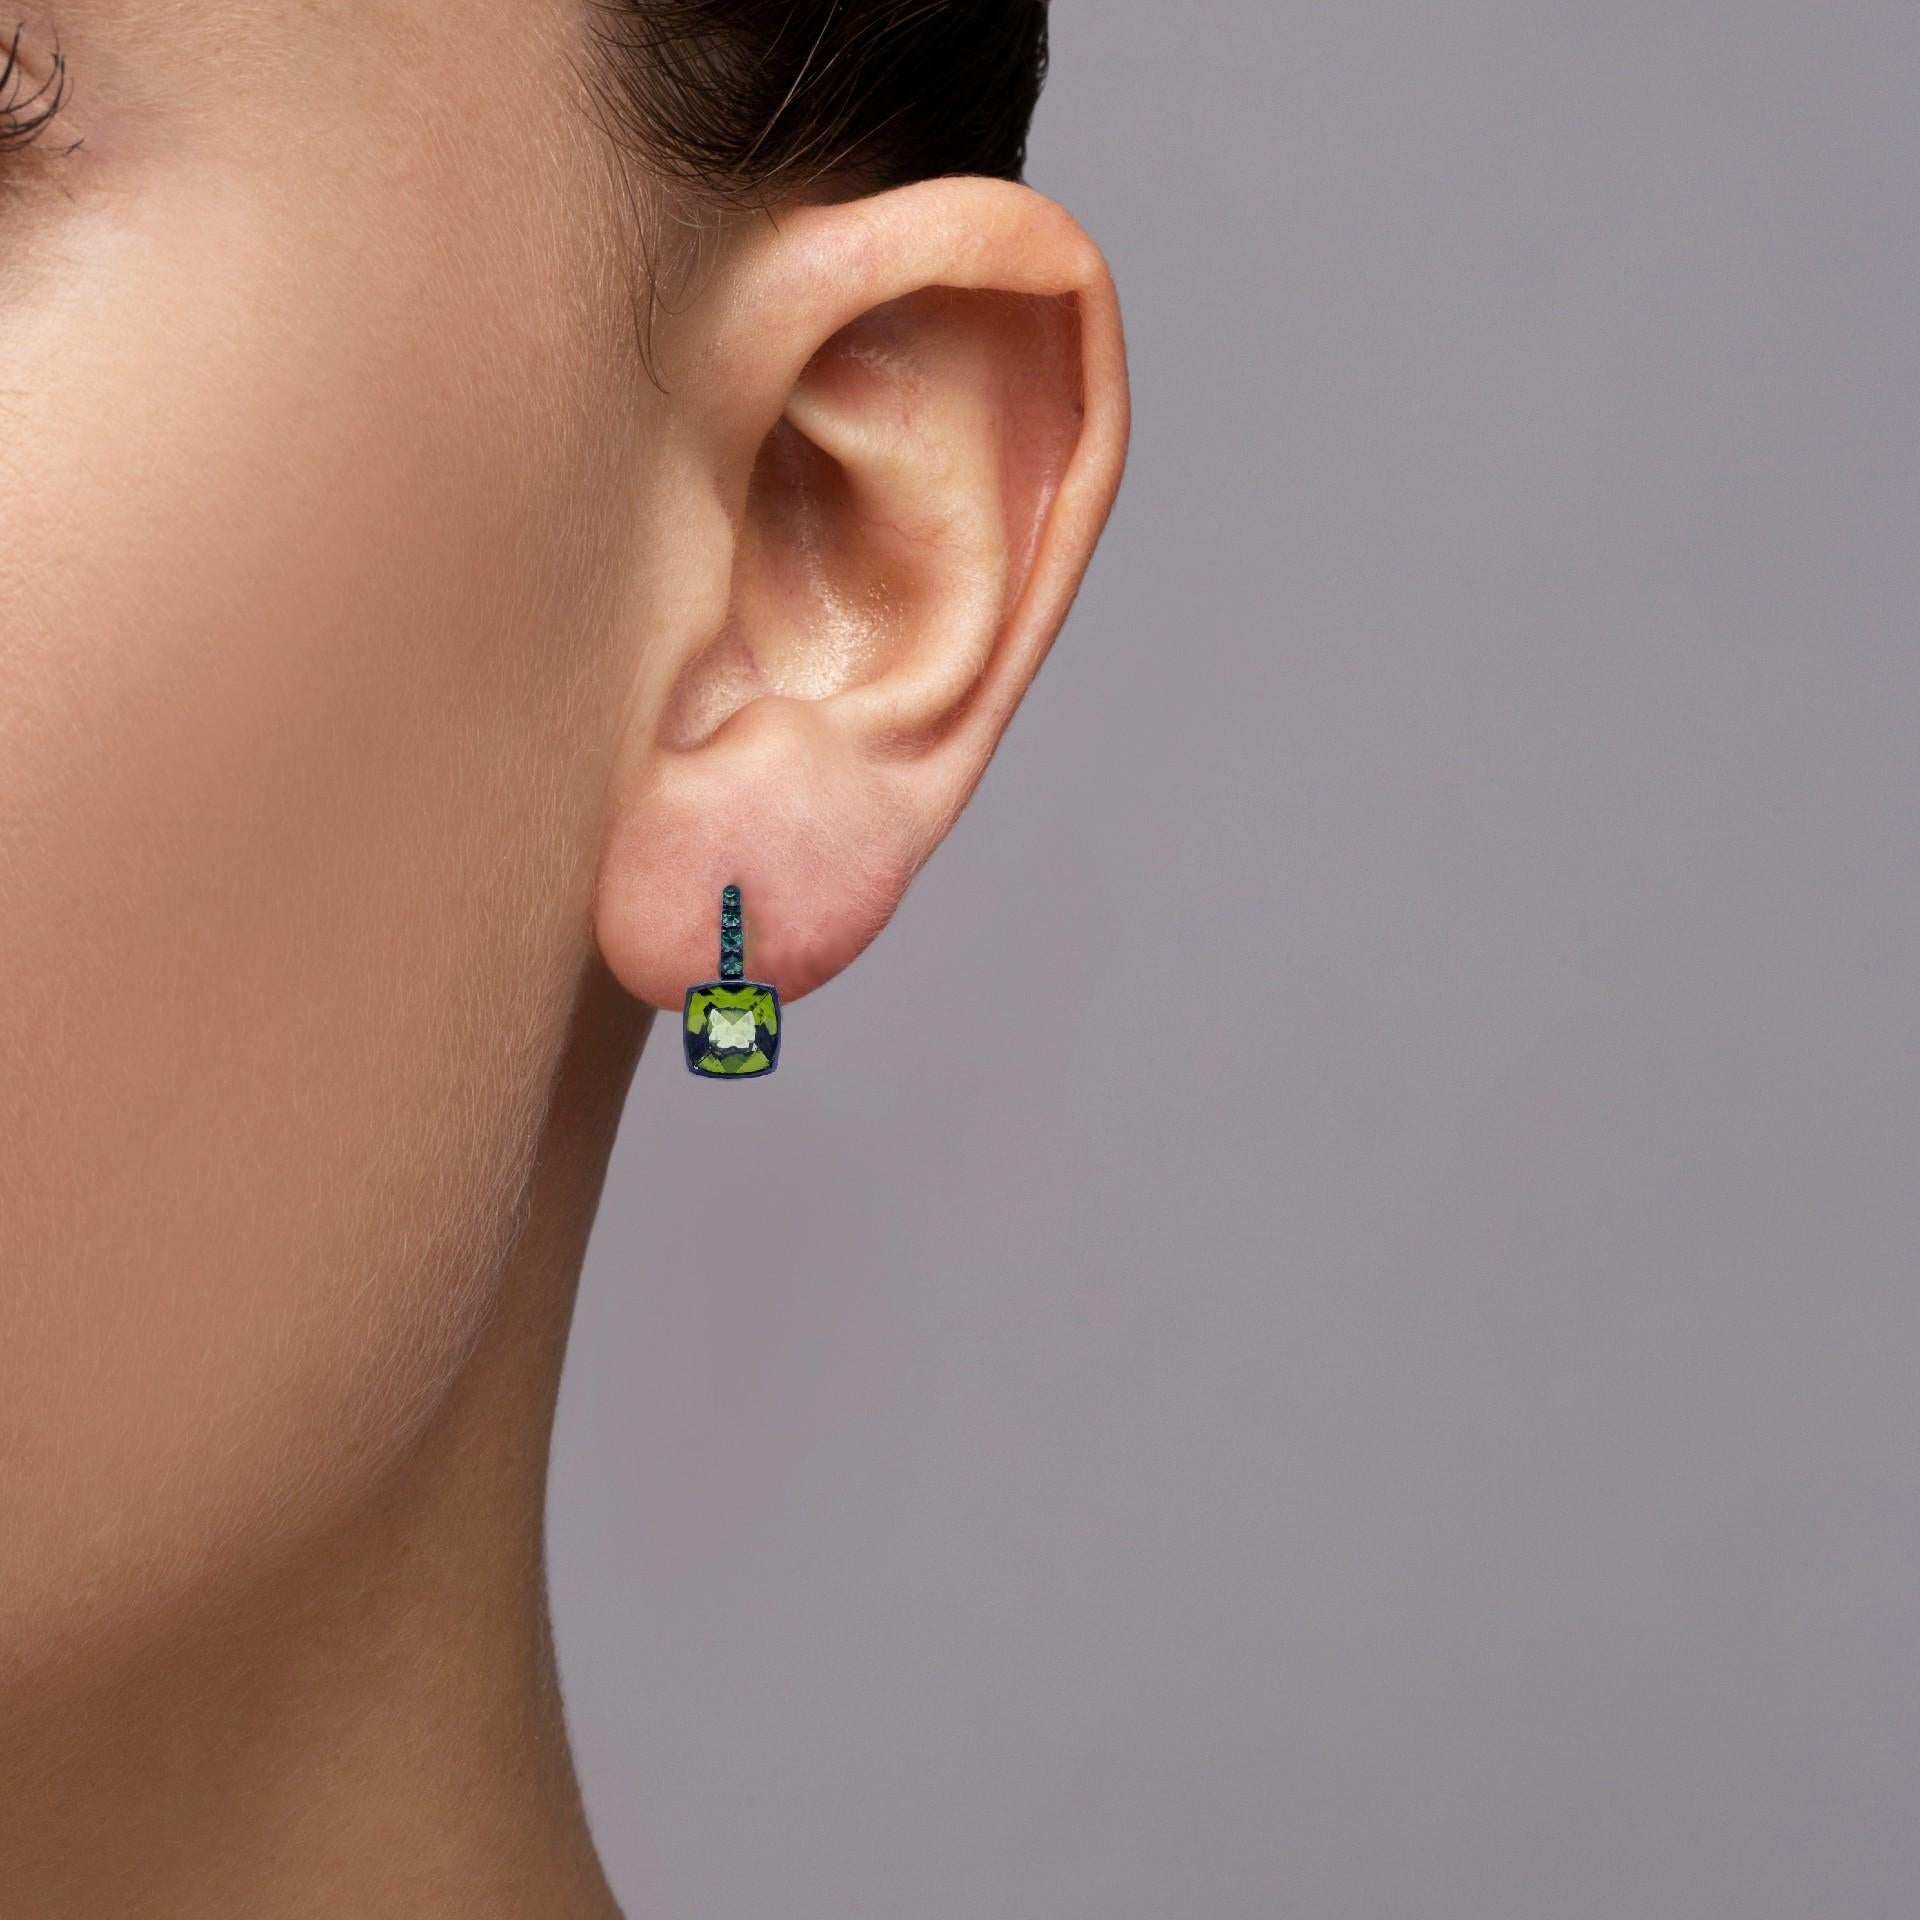 Alex Jona design collection, hand crafted in Italy, 18 karat white gold stud earrings with Black Rhodium, set with two square cut peridots weighing 3.35 carats in total, surrounded by 0,79 carats of round cut tsavorites. Black rhodium